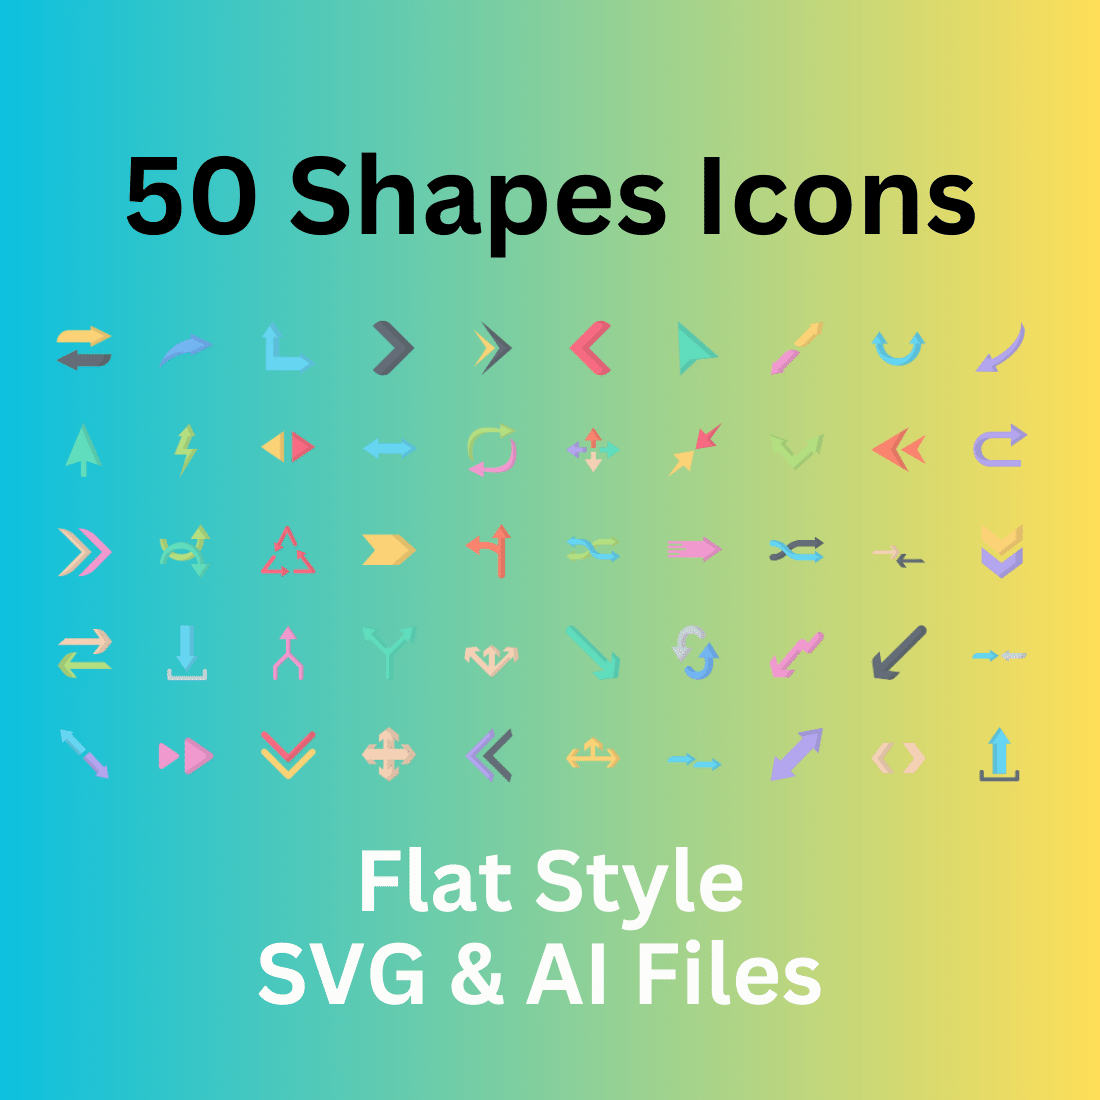 Shapes Icon Set 50 Flat Icons - SVG And AI Files cover image.